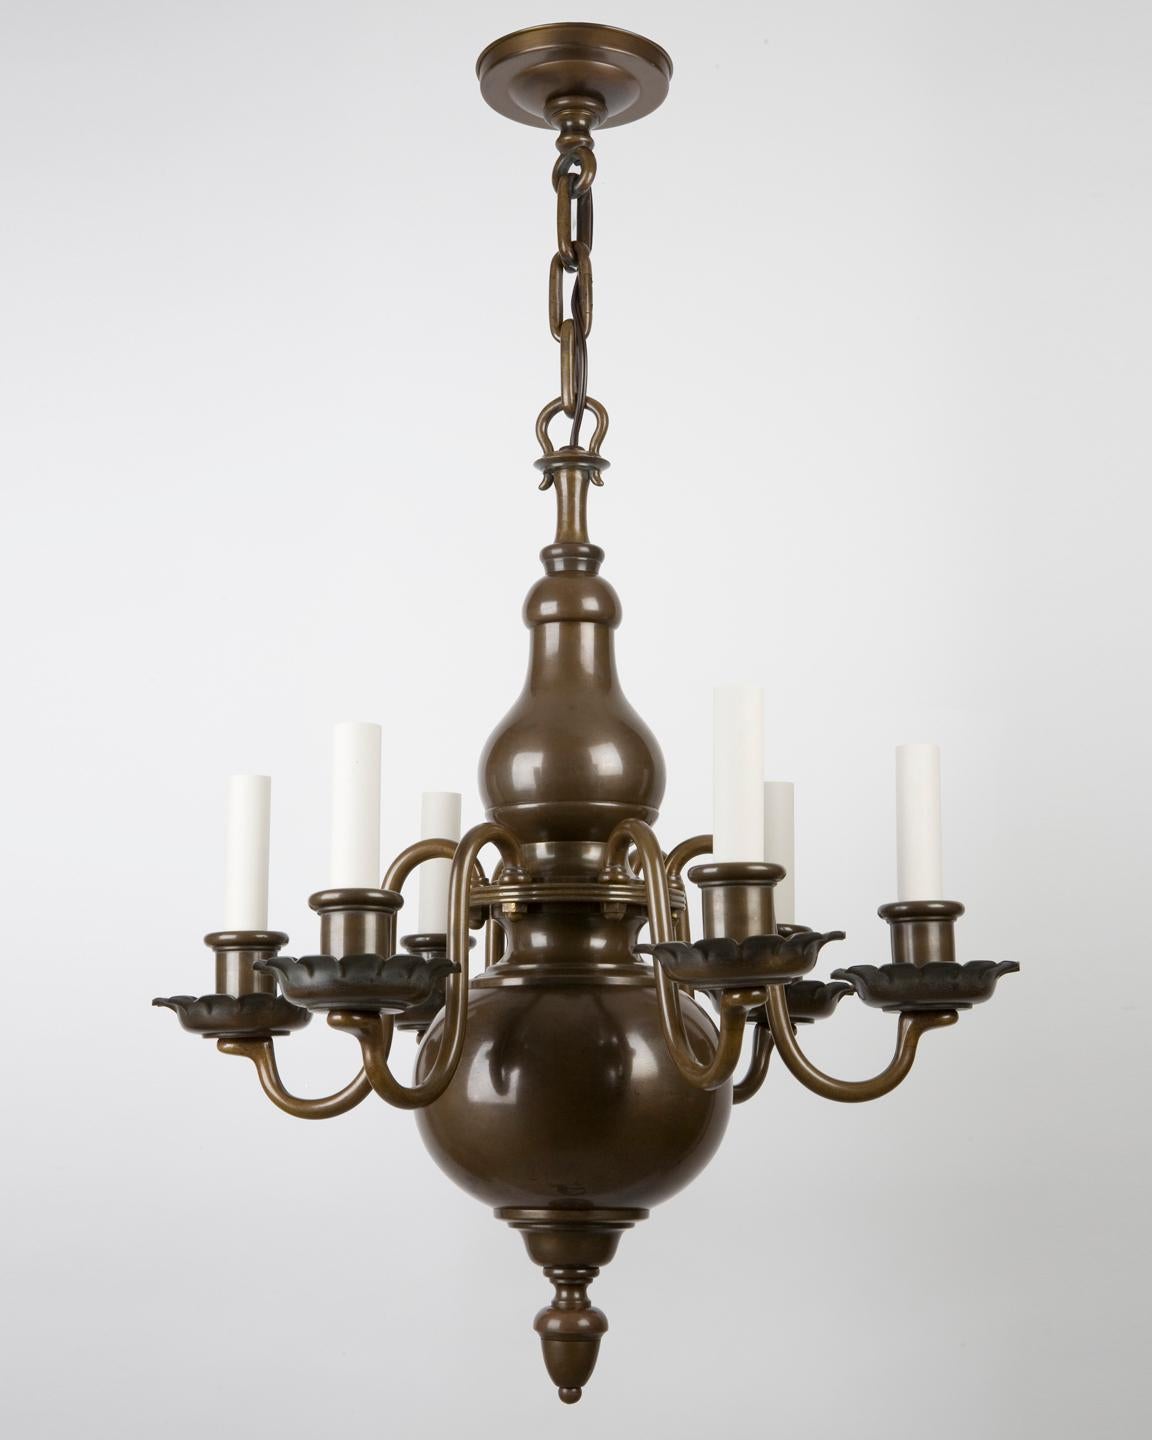 Dutch Colonial Six-Arm Dark Brass Flemish Style Chandelier by the Edward F. Caldwell Co. 1920s For Sale